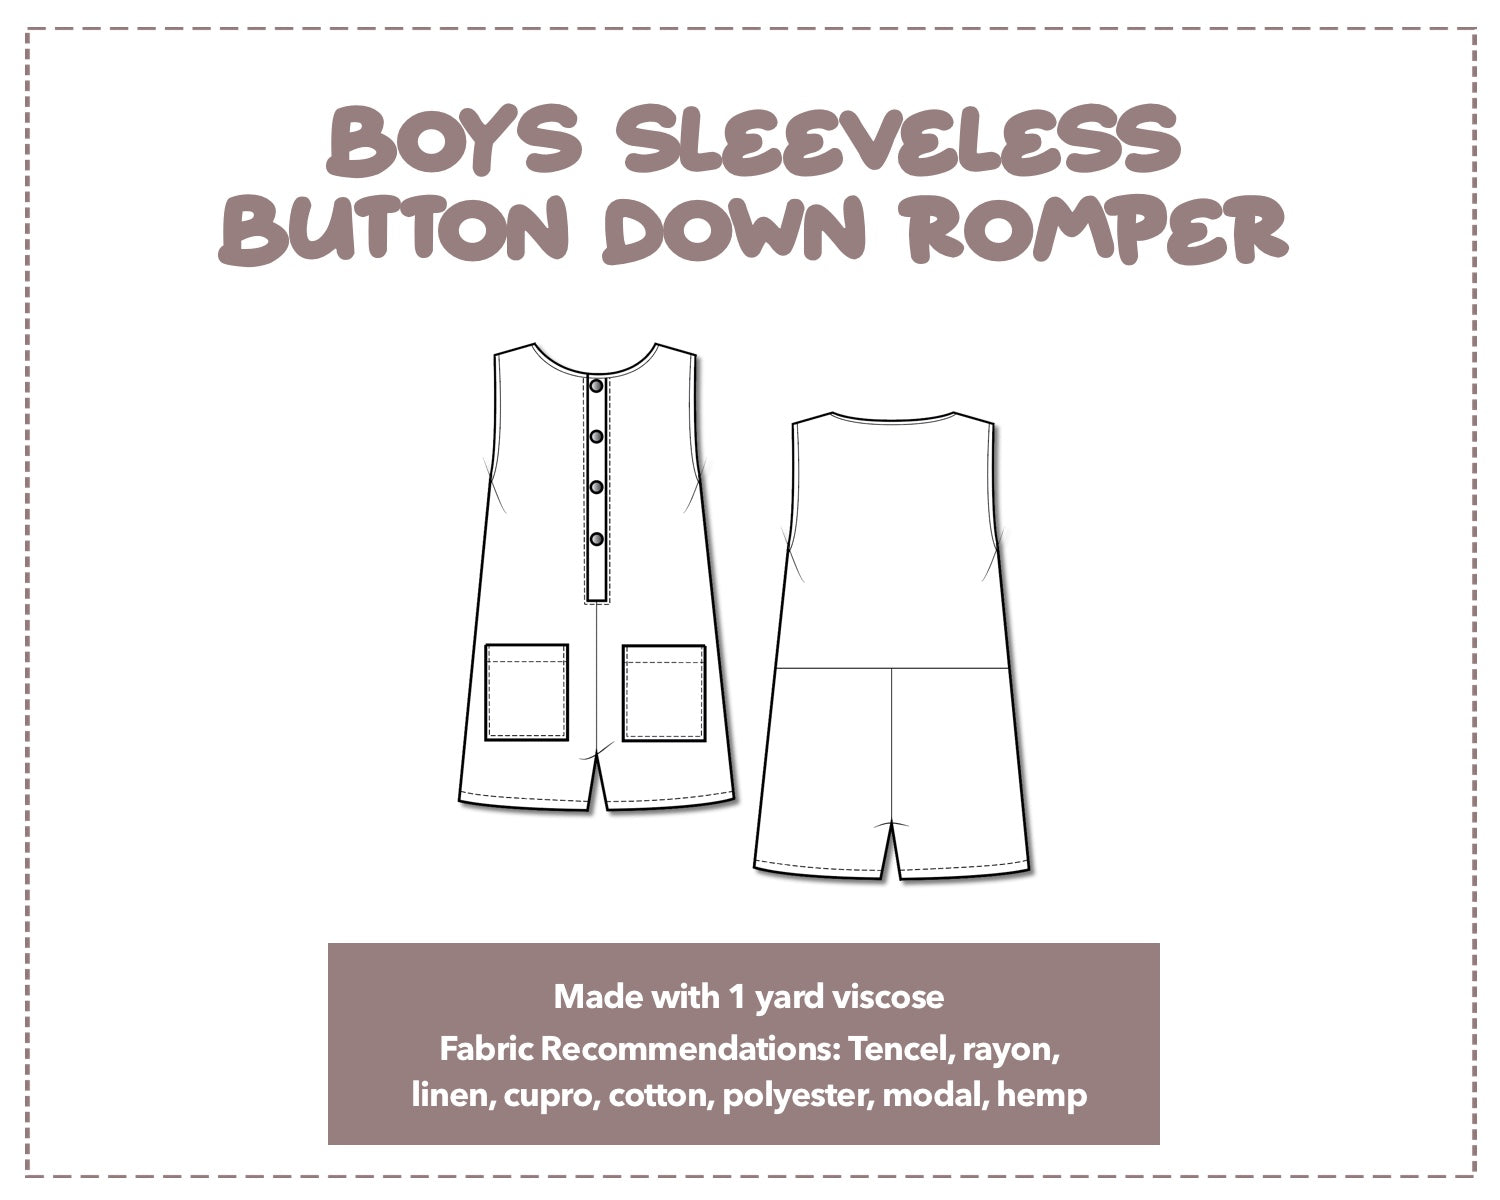 Illustration and detailed description for Sleeveless Button Down Romper sewing pattern.